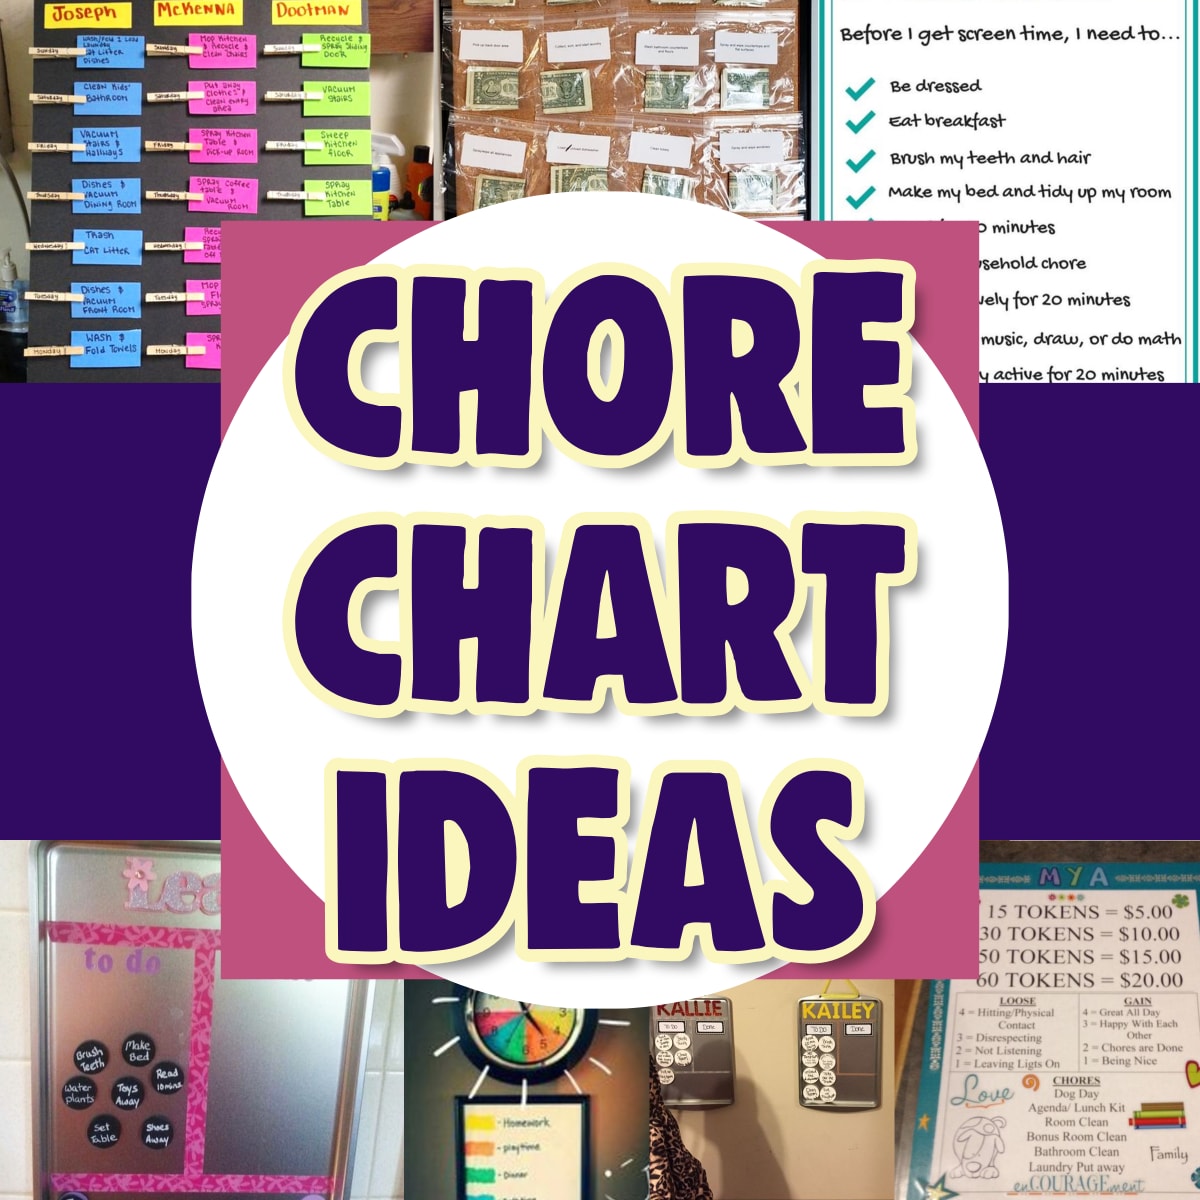 Chore Chart Ideas-Pictures of Homemade DIY chore charts for kids, responsibility charts, behavior boards and checklists of chores for kids to do before earning electronics screen time or money allowance